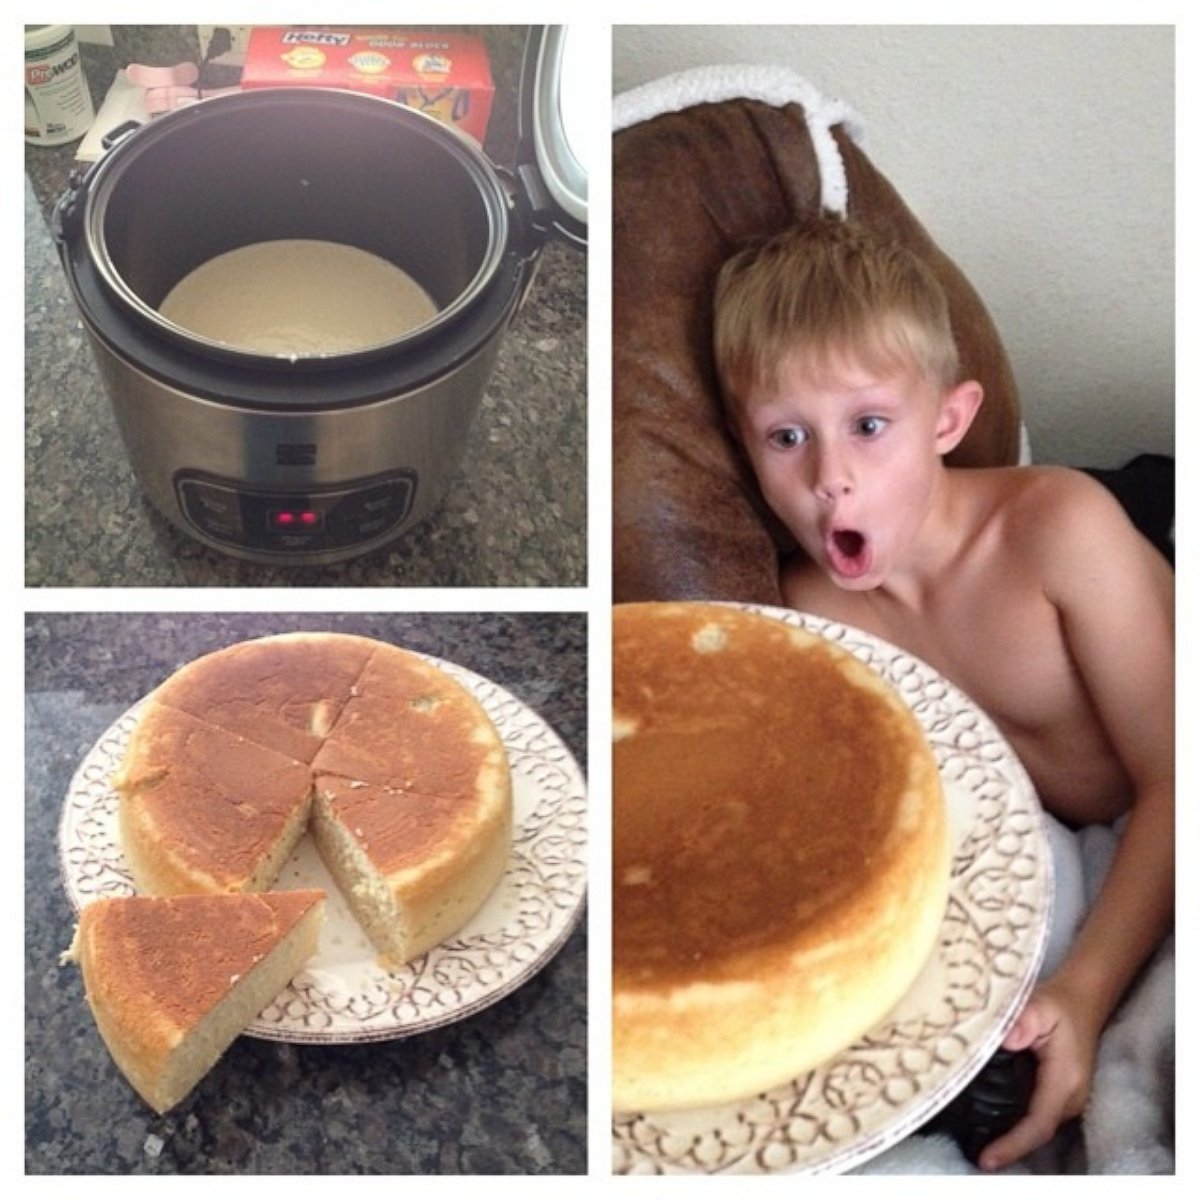 PHOTO: You'll have this reaction, too, to a pancake cake made in a rice cooker.